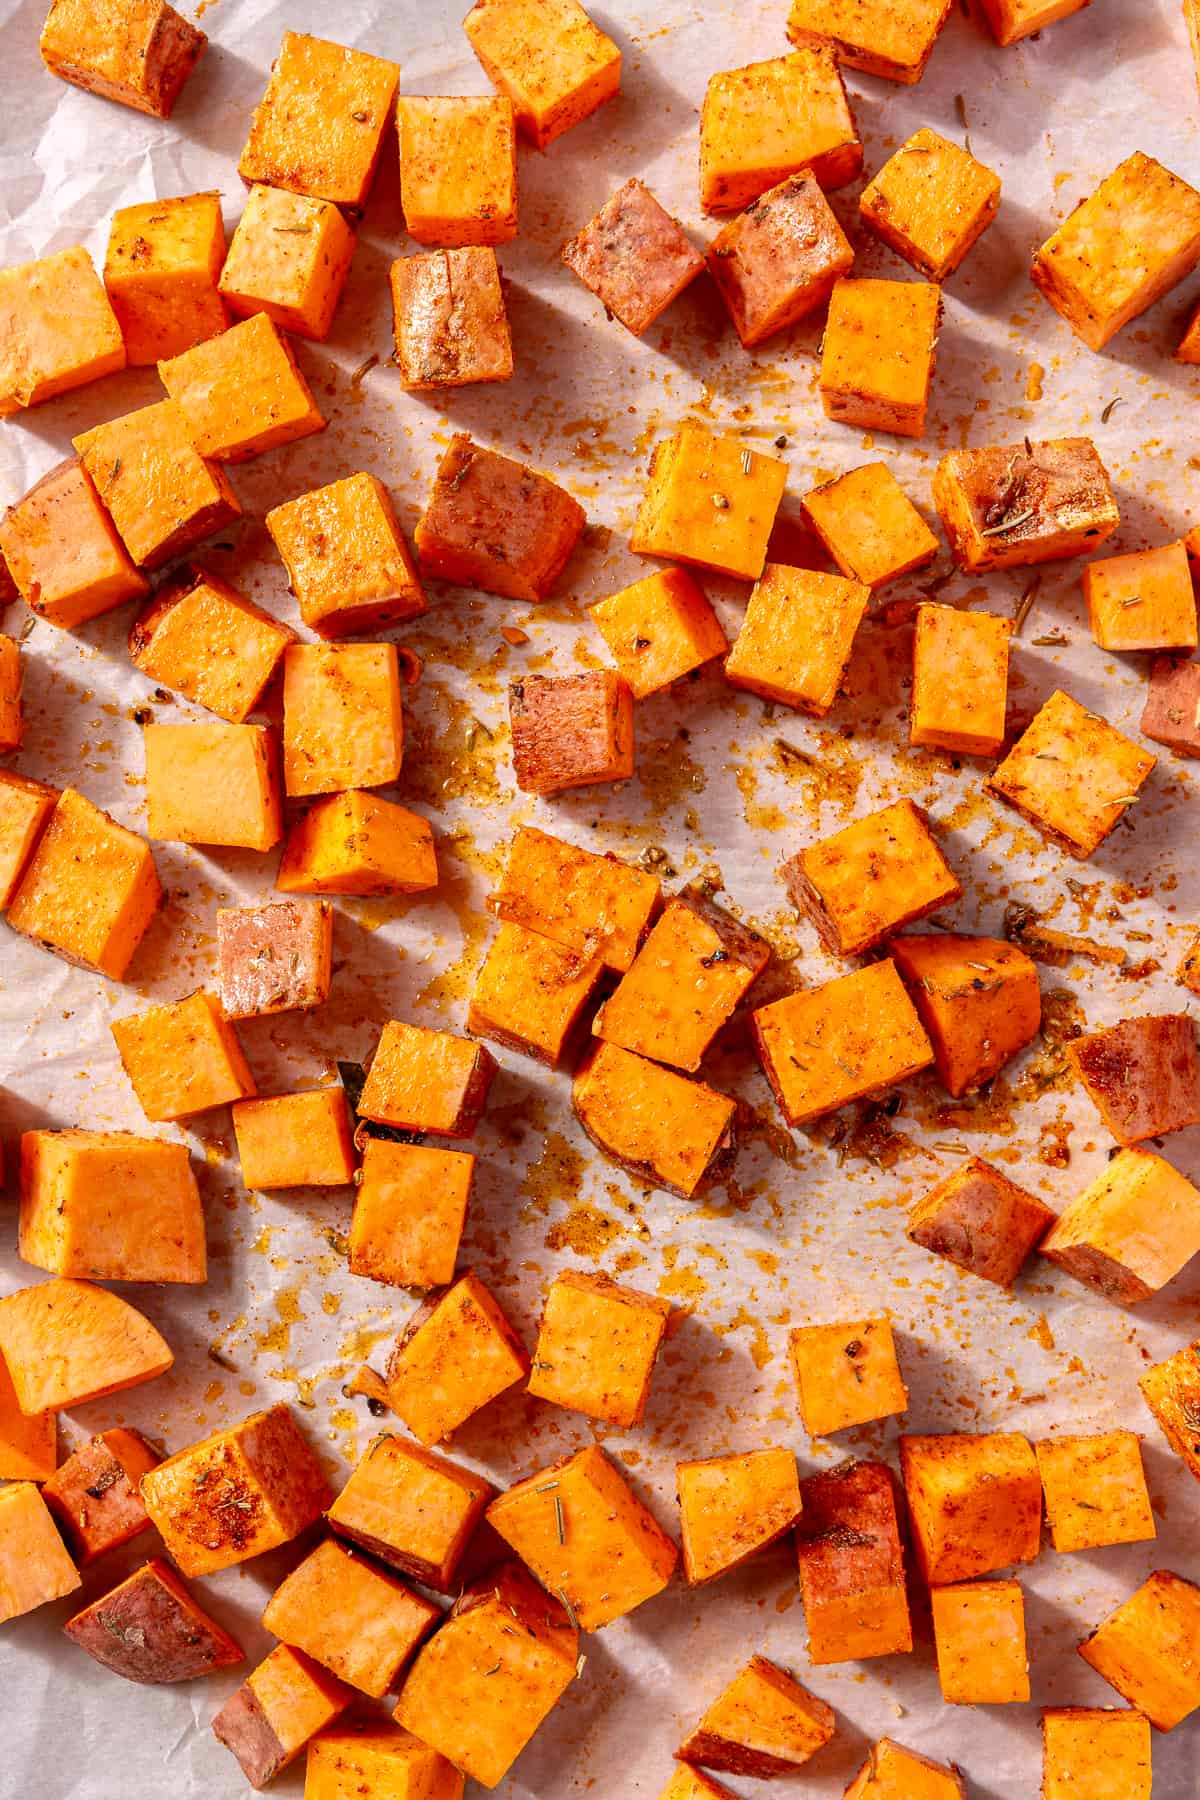 Diced sweet potatoes on a baking sheet with seasoning on top.